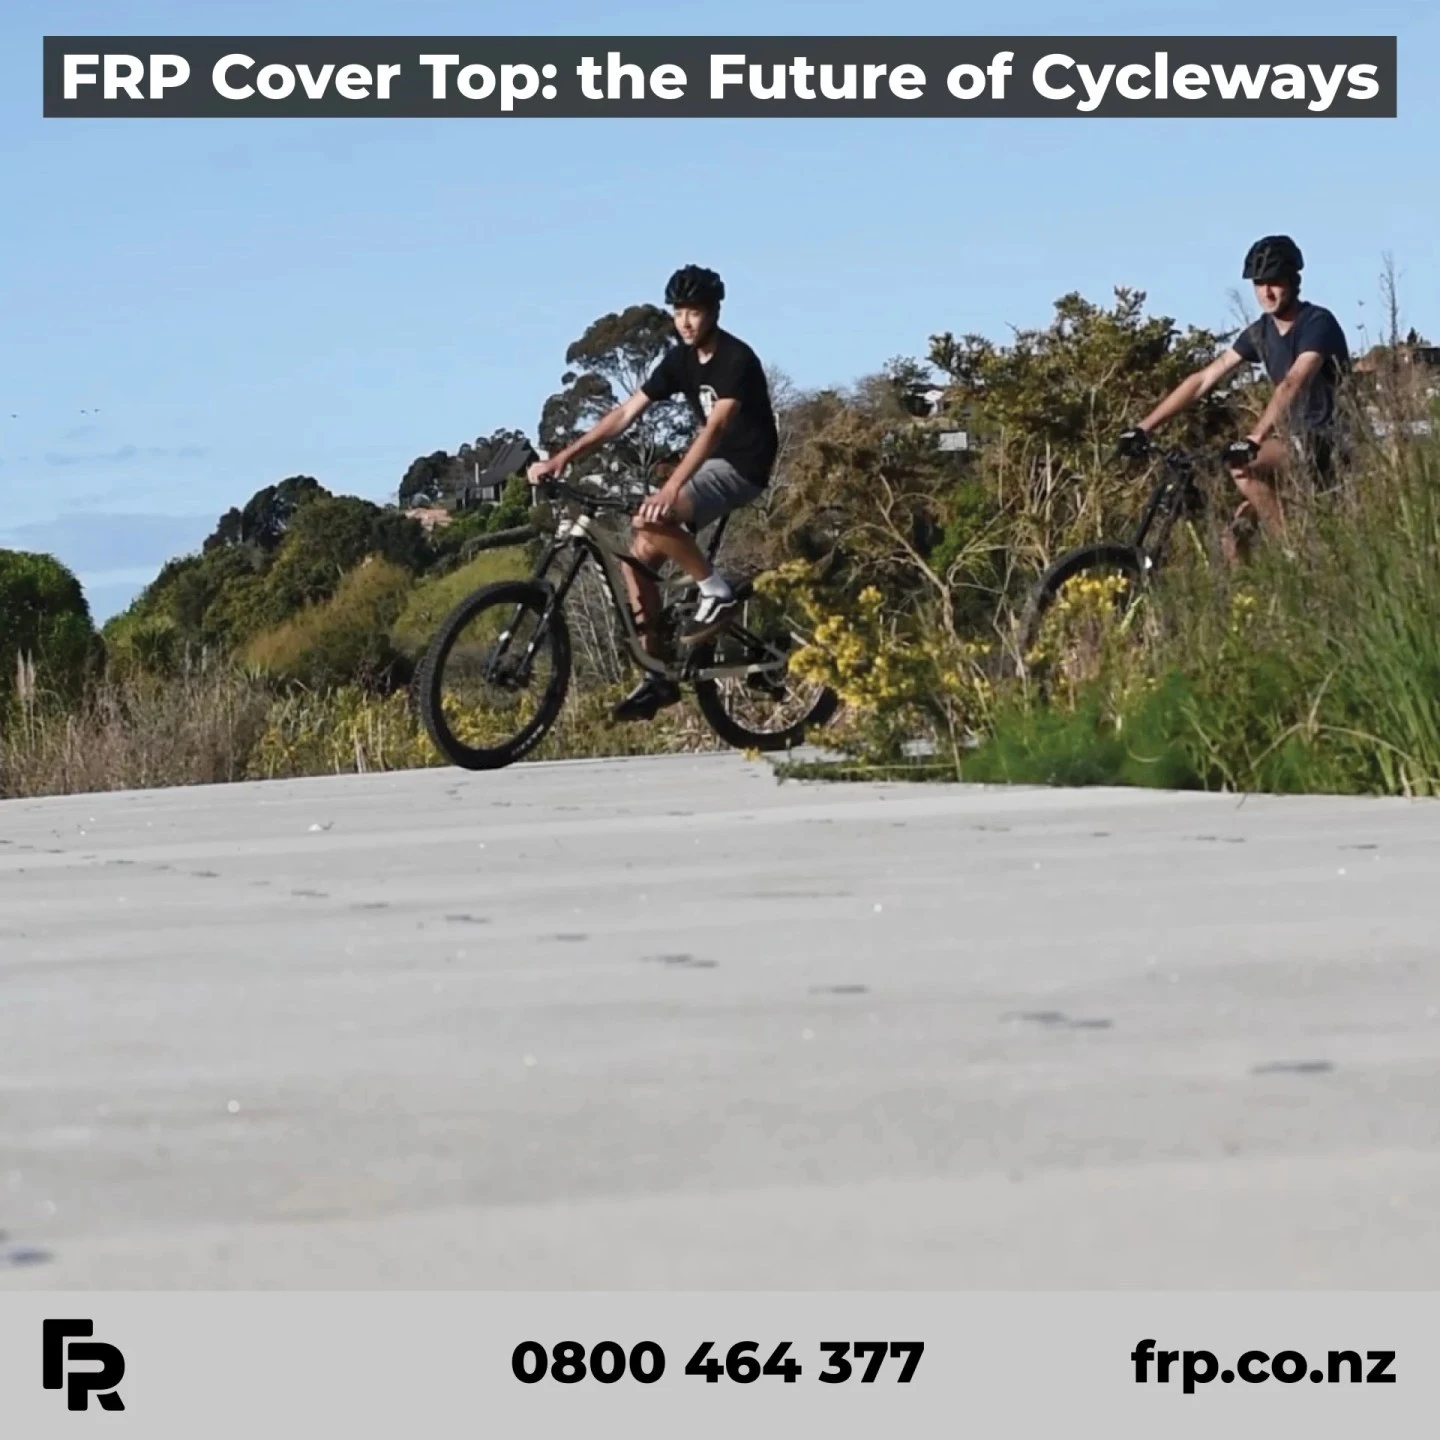 Planning a project? Let us know how we can help!

#frp #frpproducts #councils #cityplanning #nzarchitects #commercial #walkways #cycleways